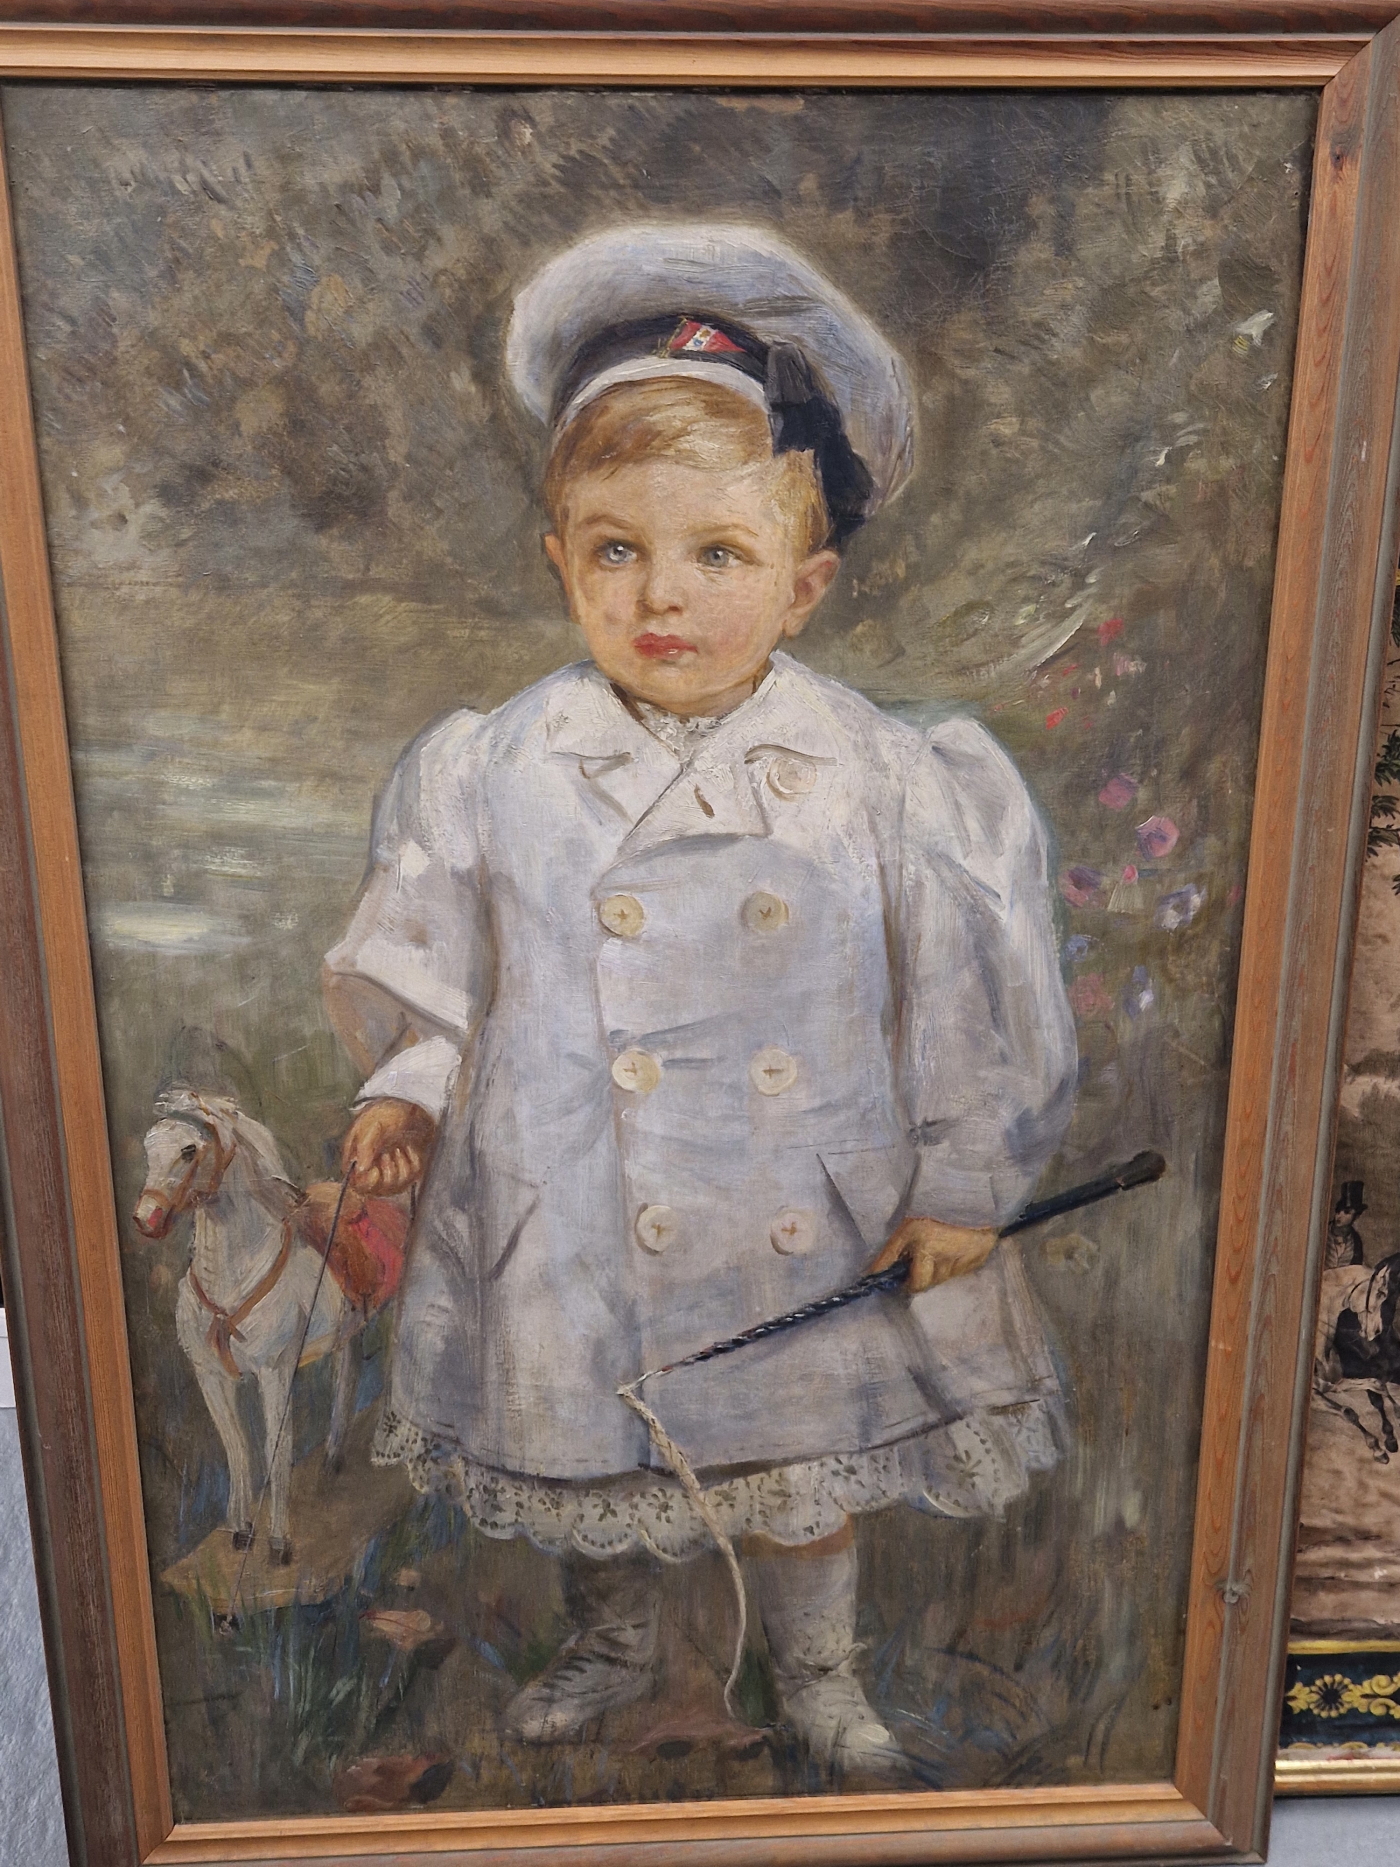 SYDNEY PRIOR HALL (1842-1922), PORTRAIT OF A YOUNG CHILD WITH A TOY HORSE IN A GARDEN, OIL ON - Image 2 of 3